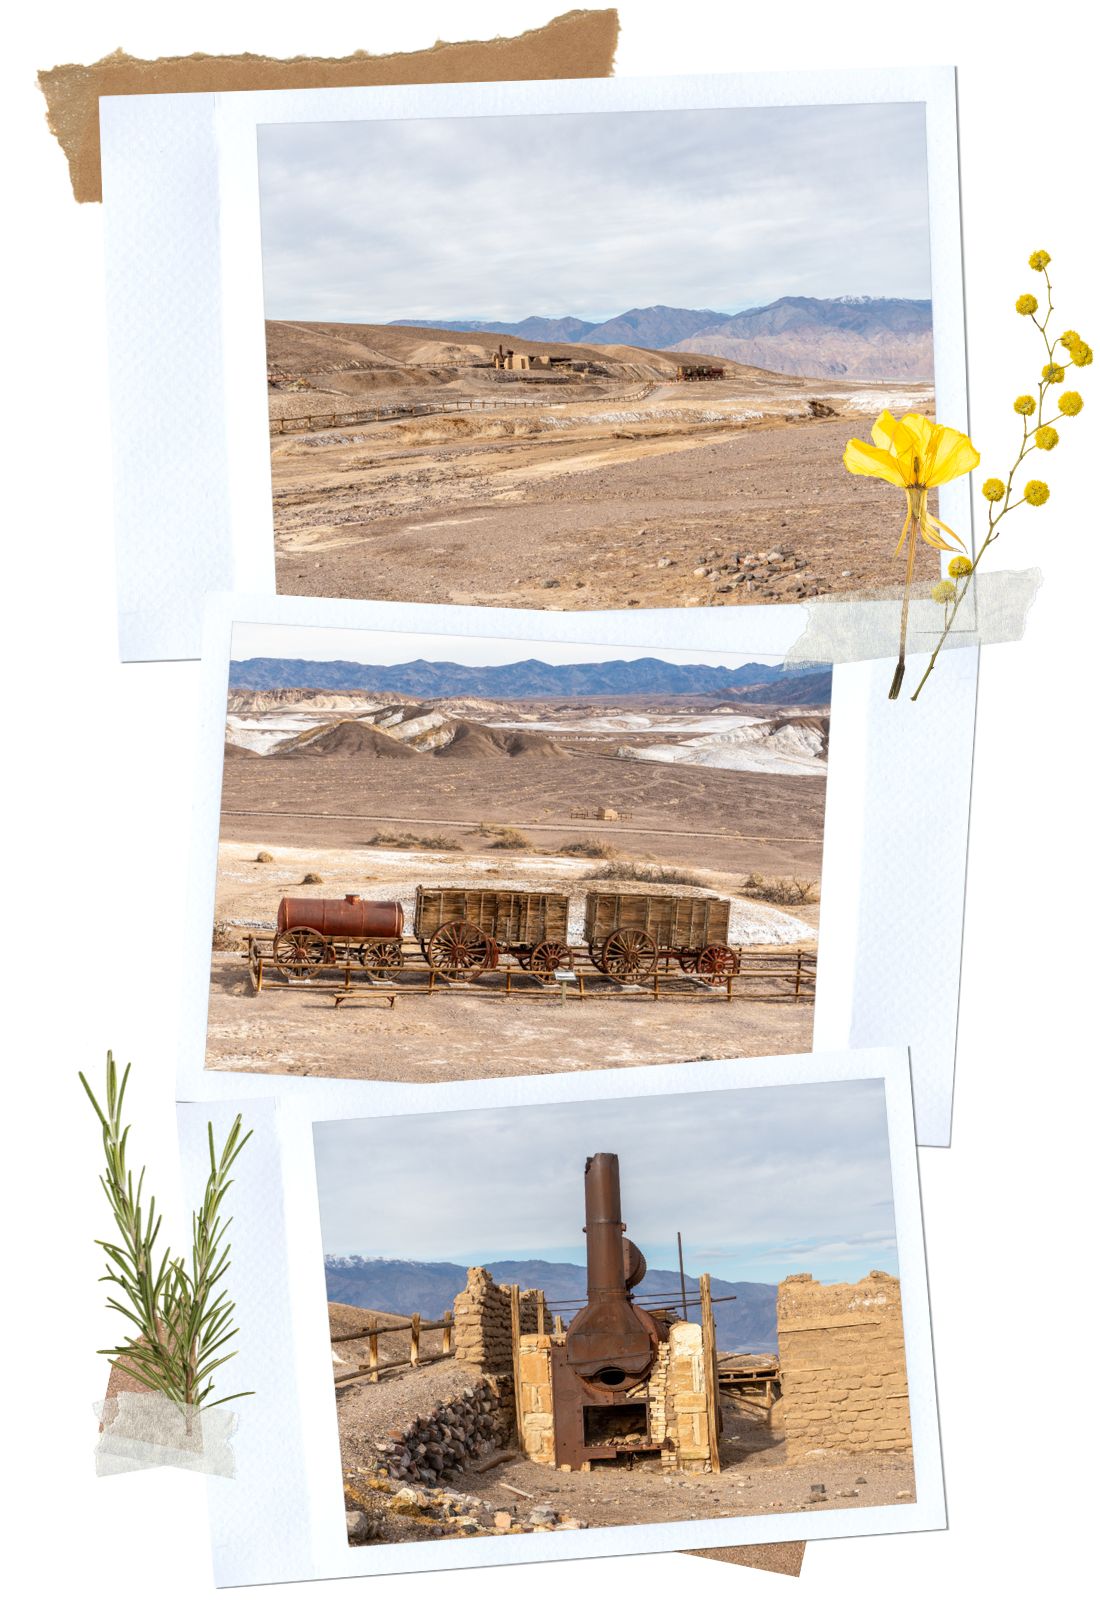 Harmony Borax Works - 5 Easy Hikes in Death Valley National Park